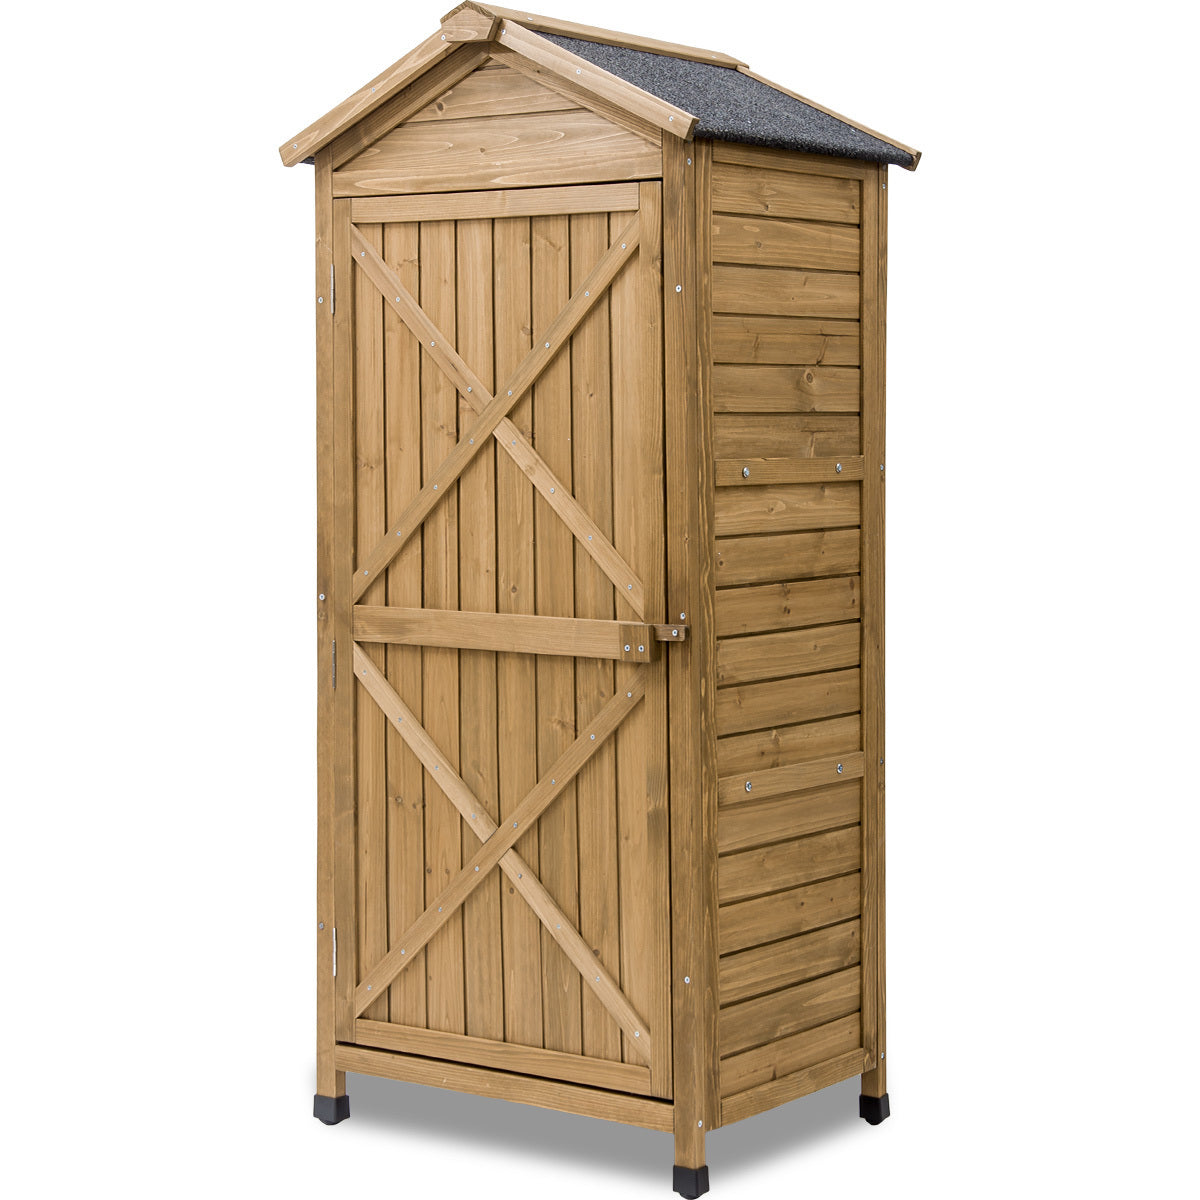 TOPMAX Outdoor Wooden Storage Sheds Fir Wood Lockers with Workstation,Natural